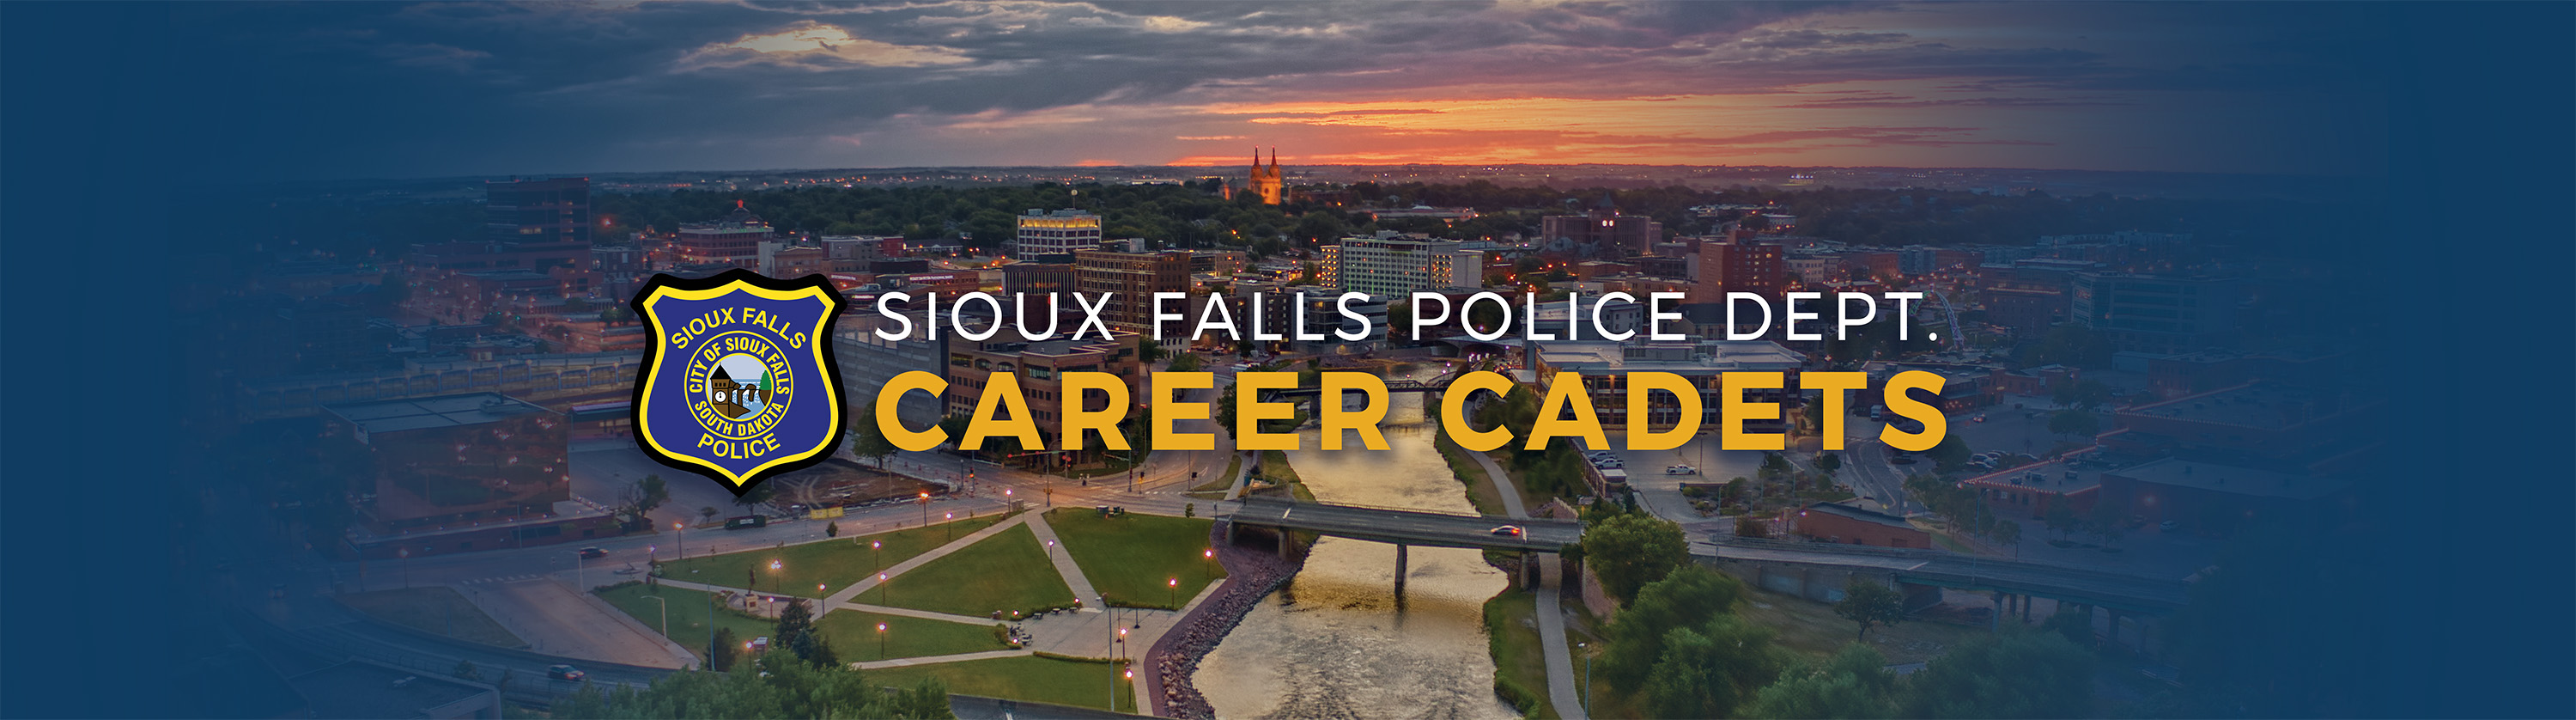 Sioux Falls Police Dept. Career Cadets